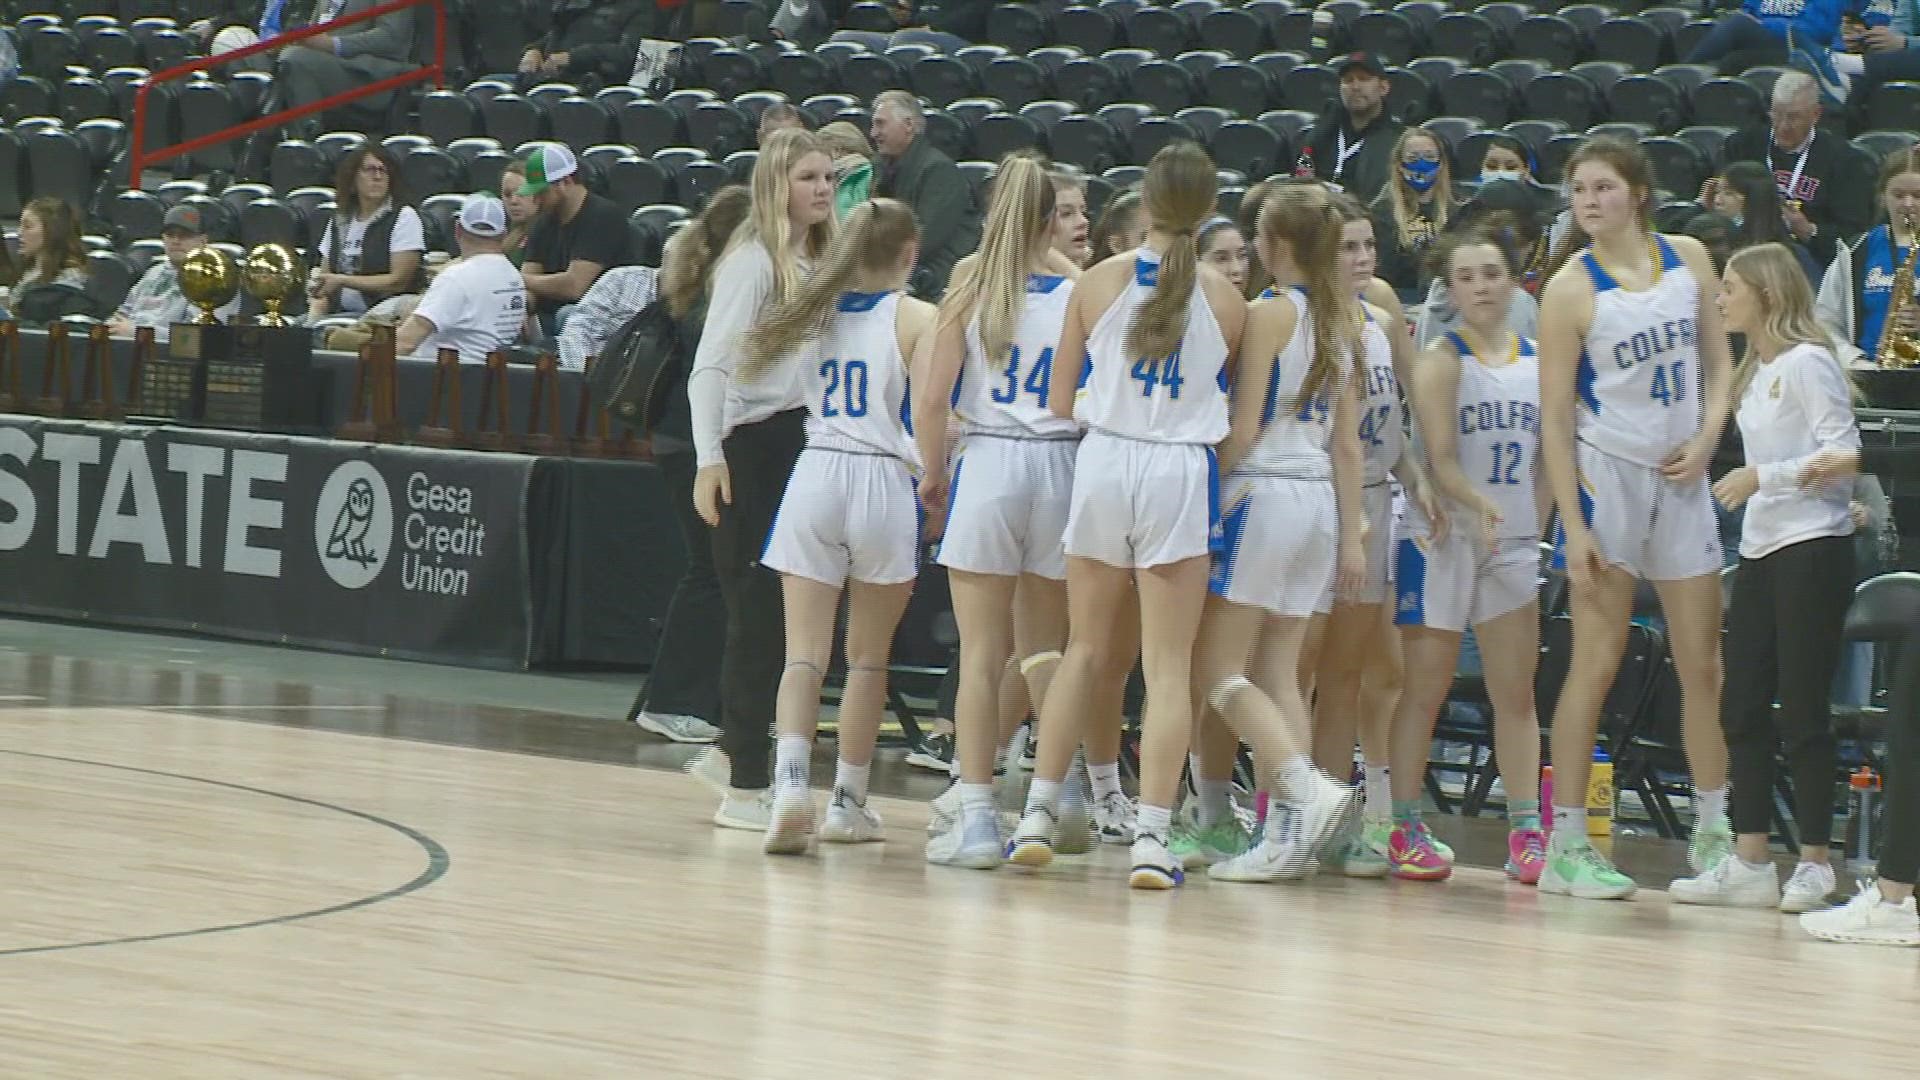 Watch highlights from the Washington State 2B basketball tournament game between #3 Colfax and #5 Raymond. Colfax won the game 67-34.